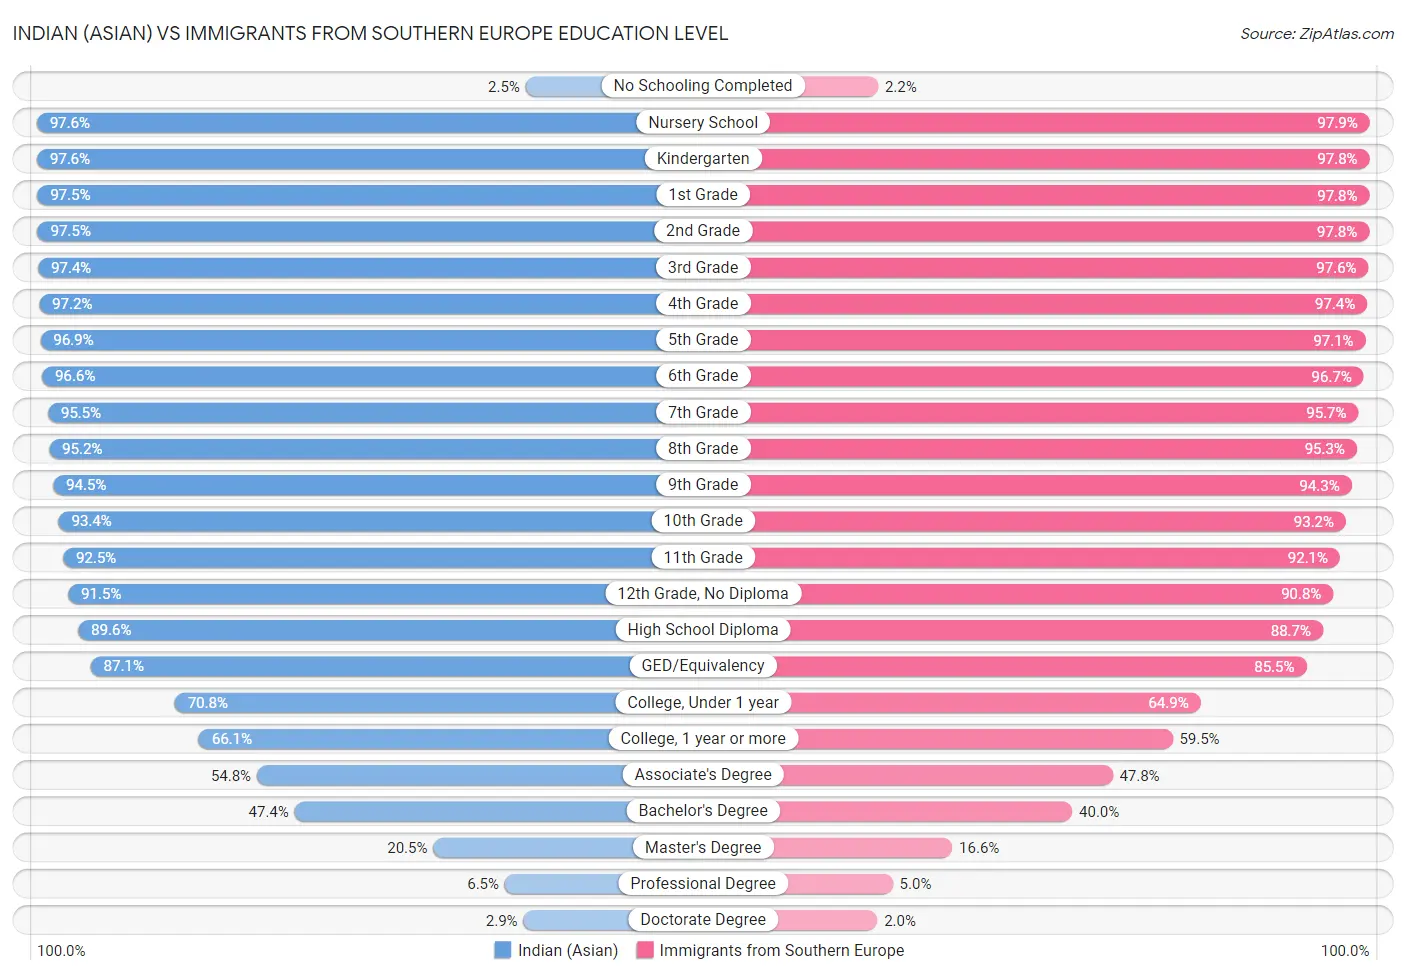 Indian (Asian) vs Immigrants from Southern Europe Education Level